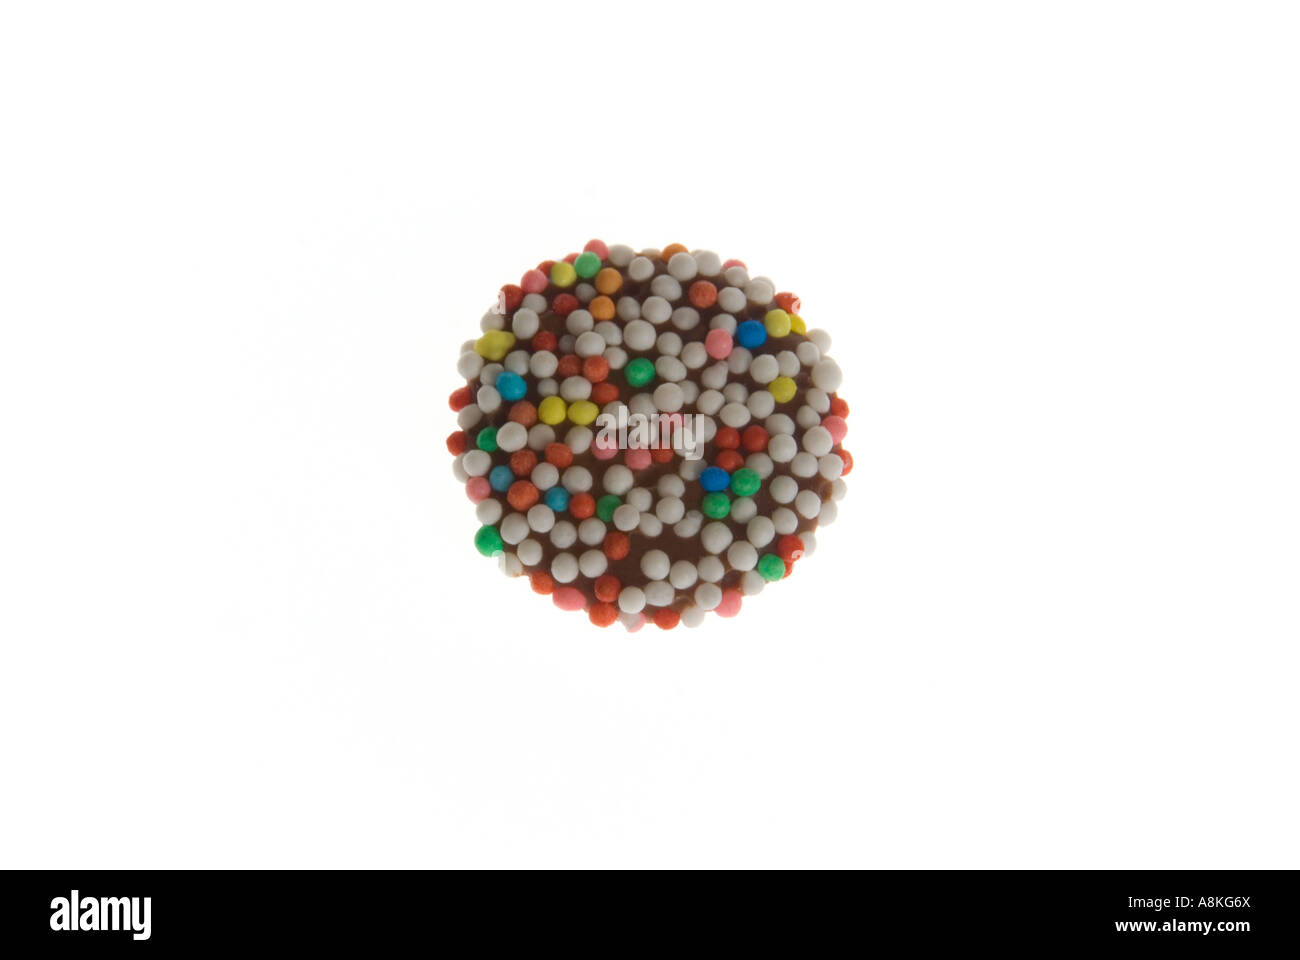 Horizontal close up of one milk chocolate button on a white background. Stock Photo